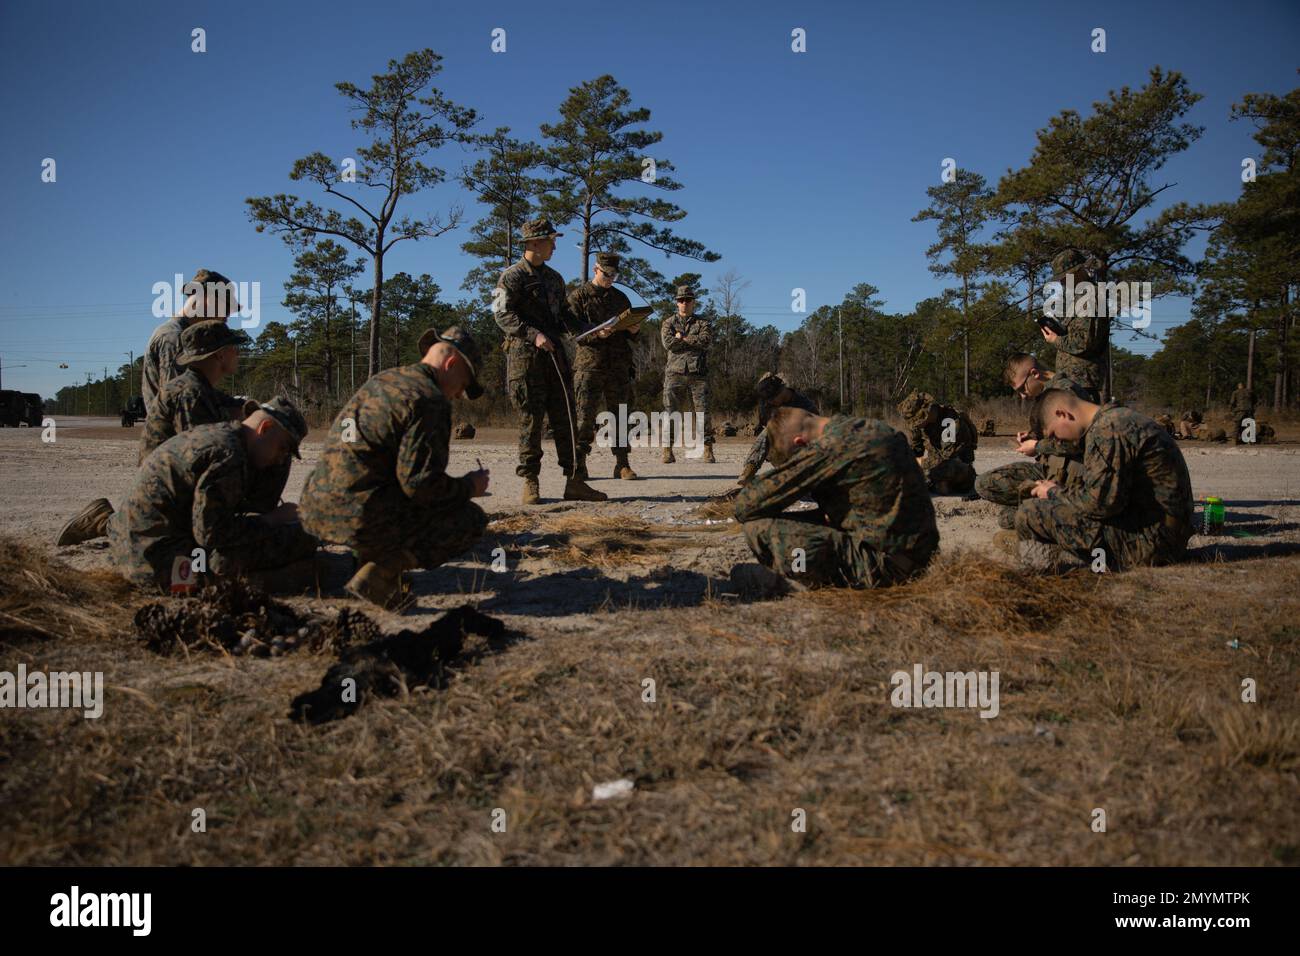 U.S. Marine Corps Sgt. Michael Graf, squad leader, 3rd Battalion, 25th Marine Regiment, 4th Marine Division (MARDIV), Marine Forces Reserve, conducts an evaluated brief over a terrain model as part of the 4th MARDIV Rifle Squad Competition on Marine Corps Base (MCB) Camp Lejeune, North Carolina, Jan. 28, 2023. The three-day event tested the Marines across a variety of infantry skills to determine the most combat effective rifle squad within the 4th MARDIV. MCB Camp Lejeune training facilities allow warfighters to be ready today and prepare for tomorrow’s fight. (U.S. Marine Corps Photo by Cpl. Stock Photo